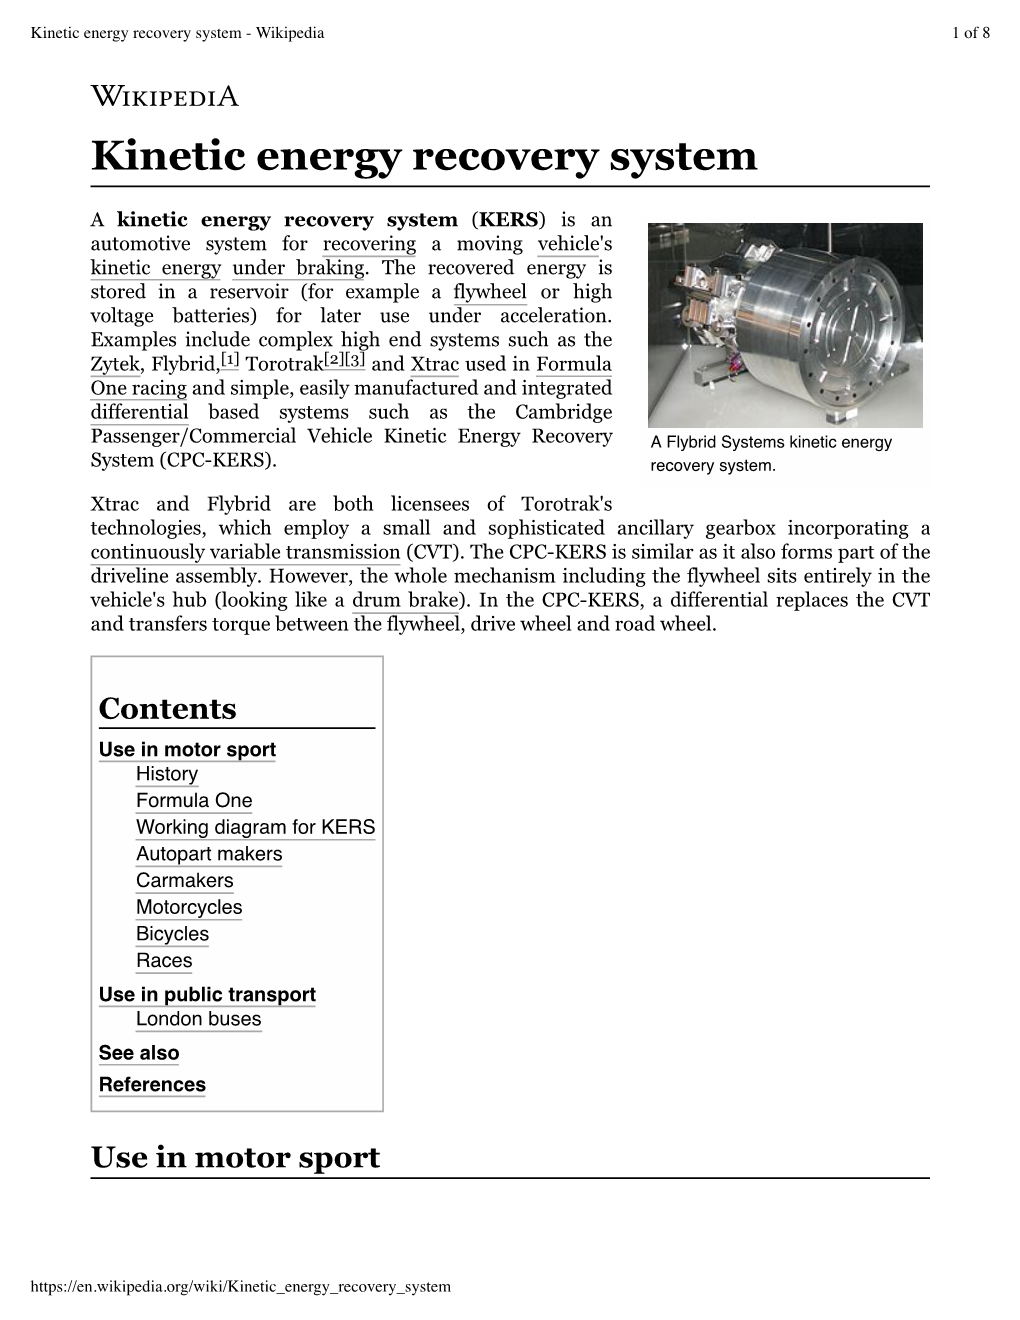 Kinetic Energy Recovery System - Wikipedia 1 of 8